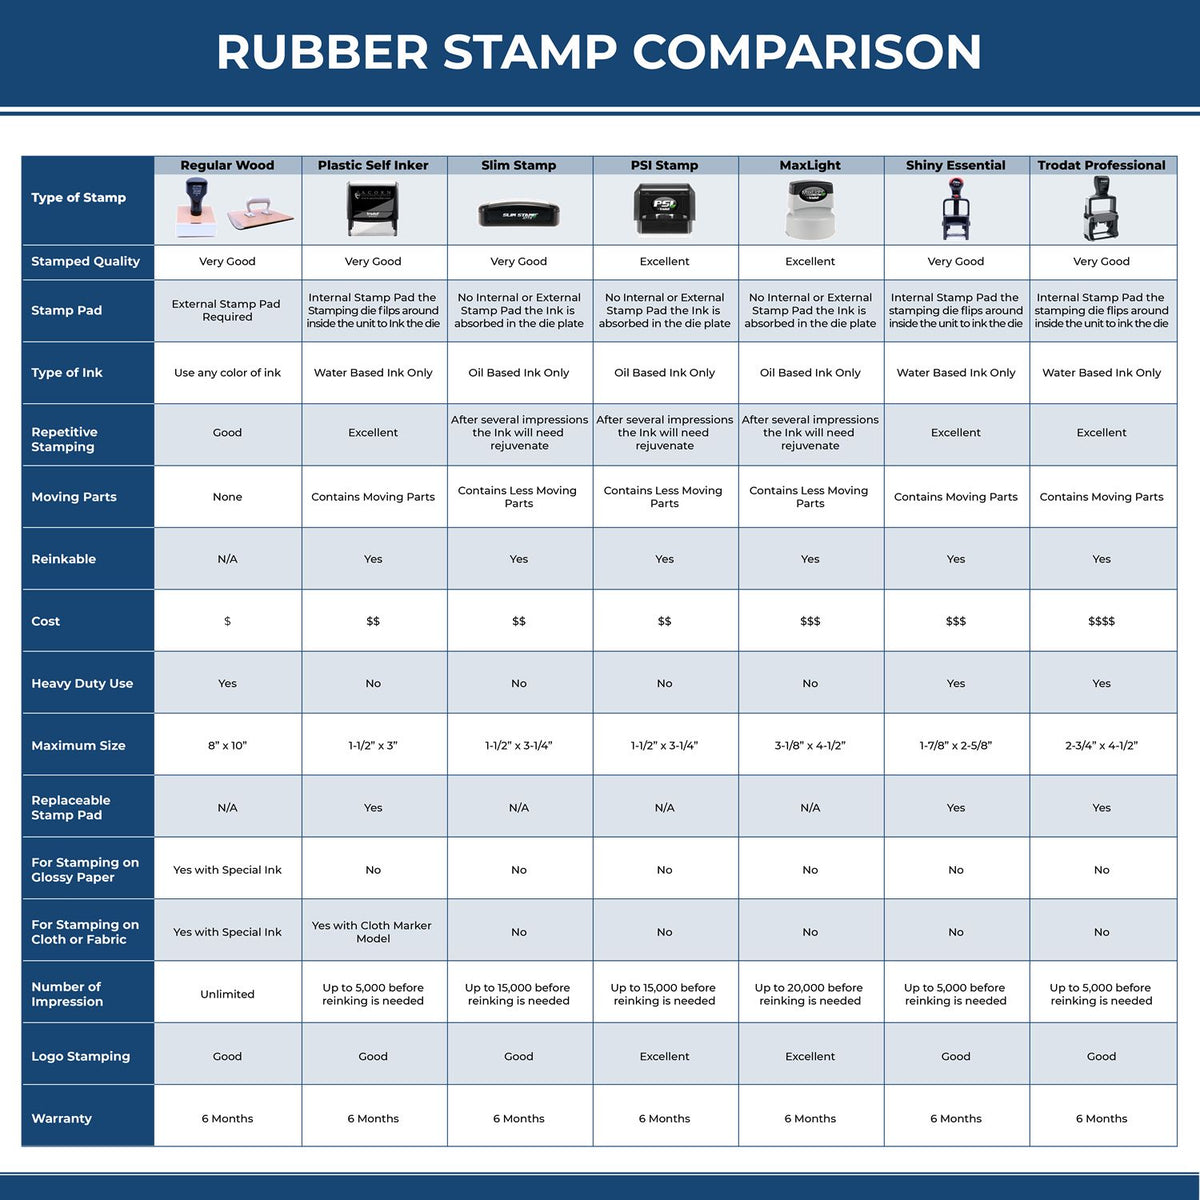 A comparison chart for the different types of mount models available for the Super Slim Illinois Notary Public Stamp.